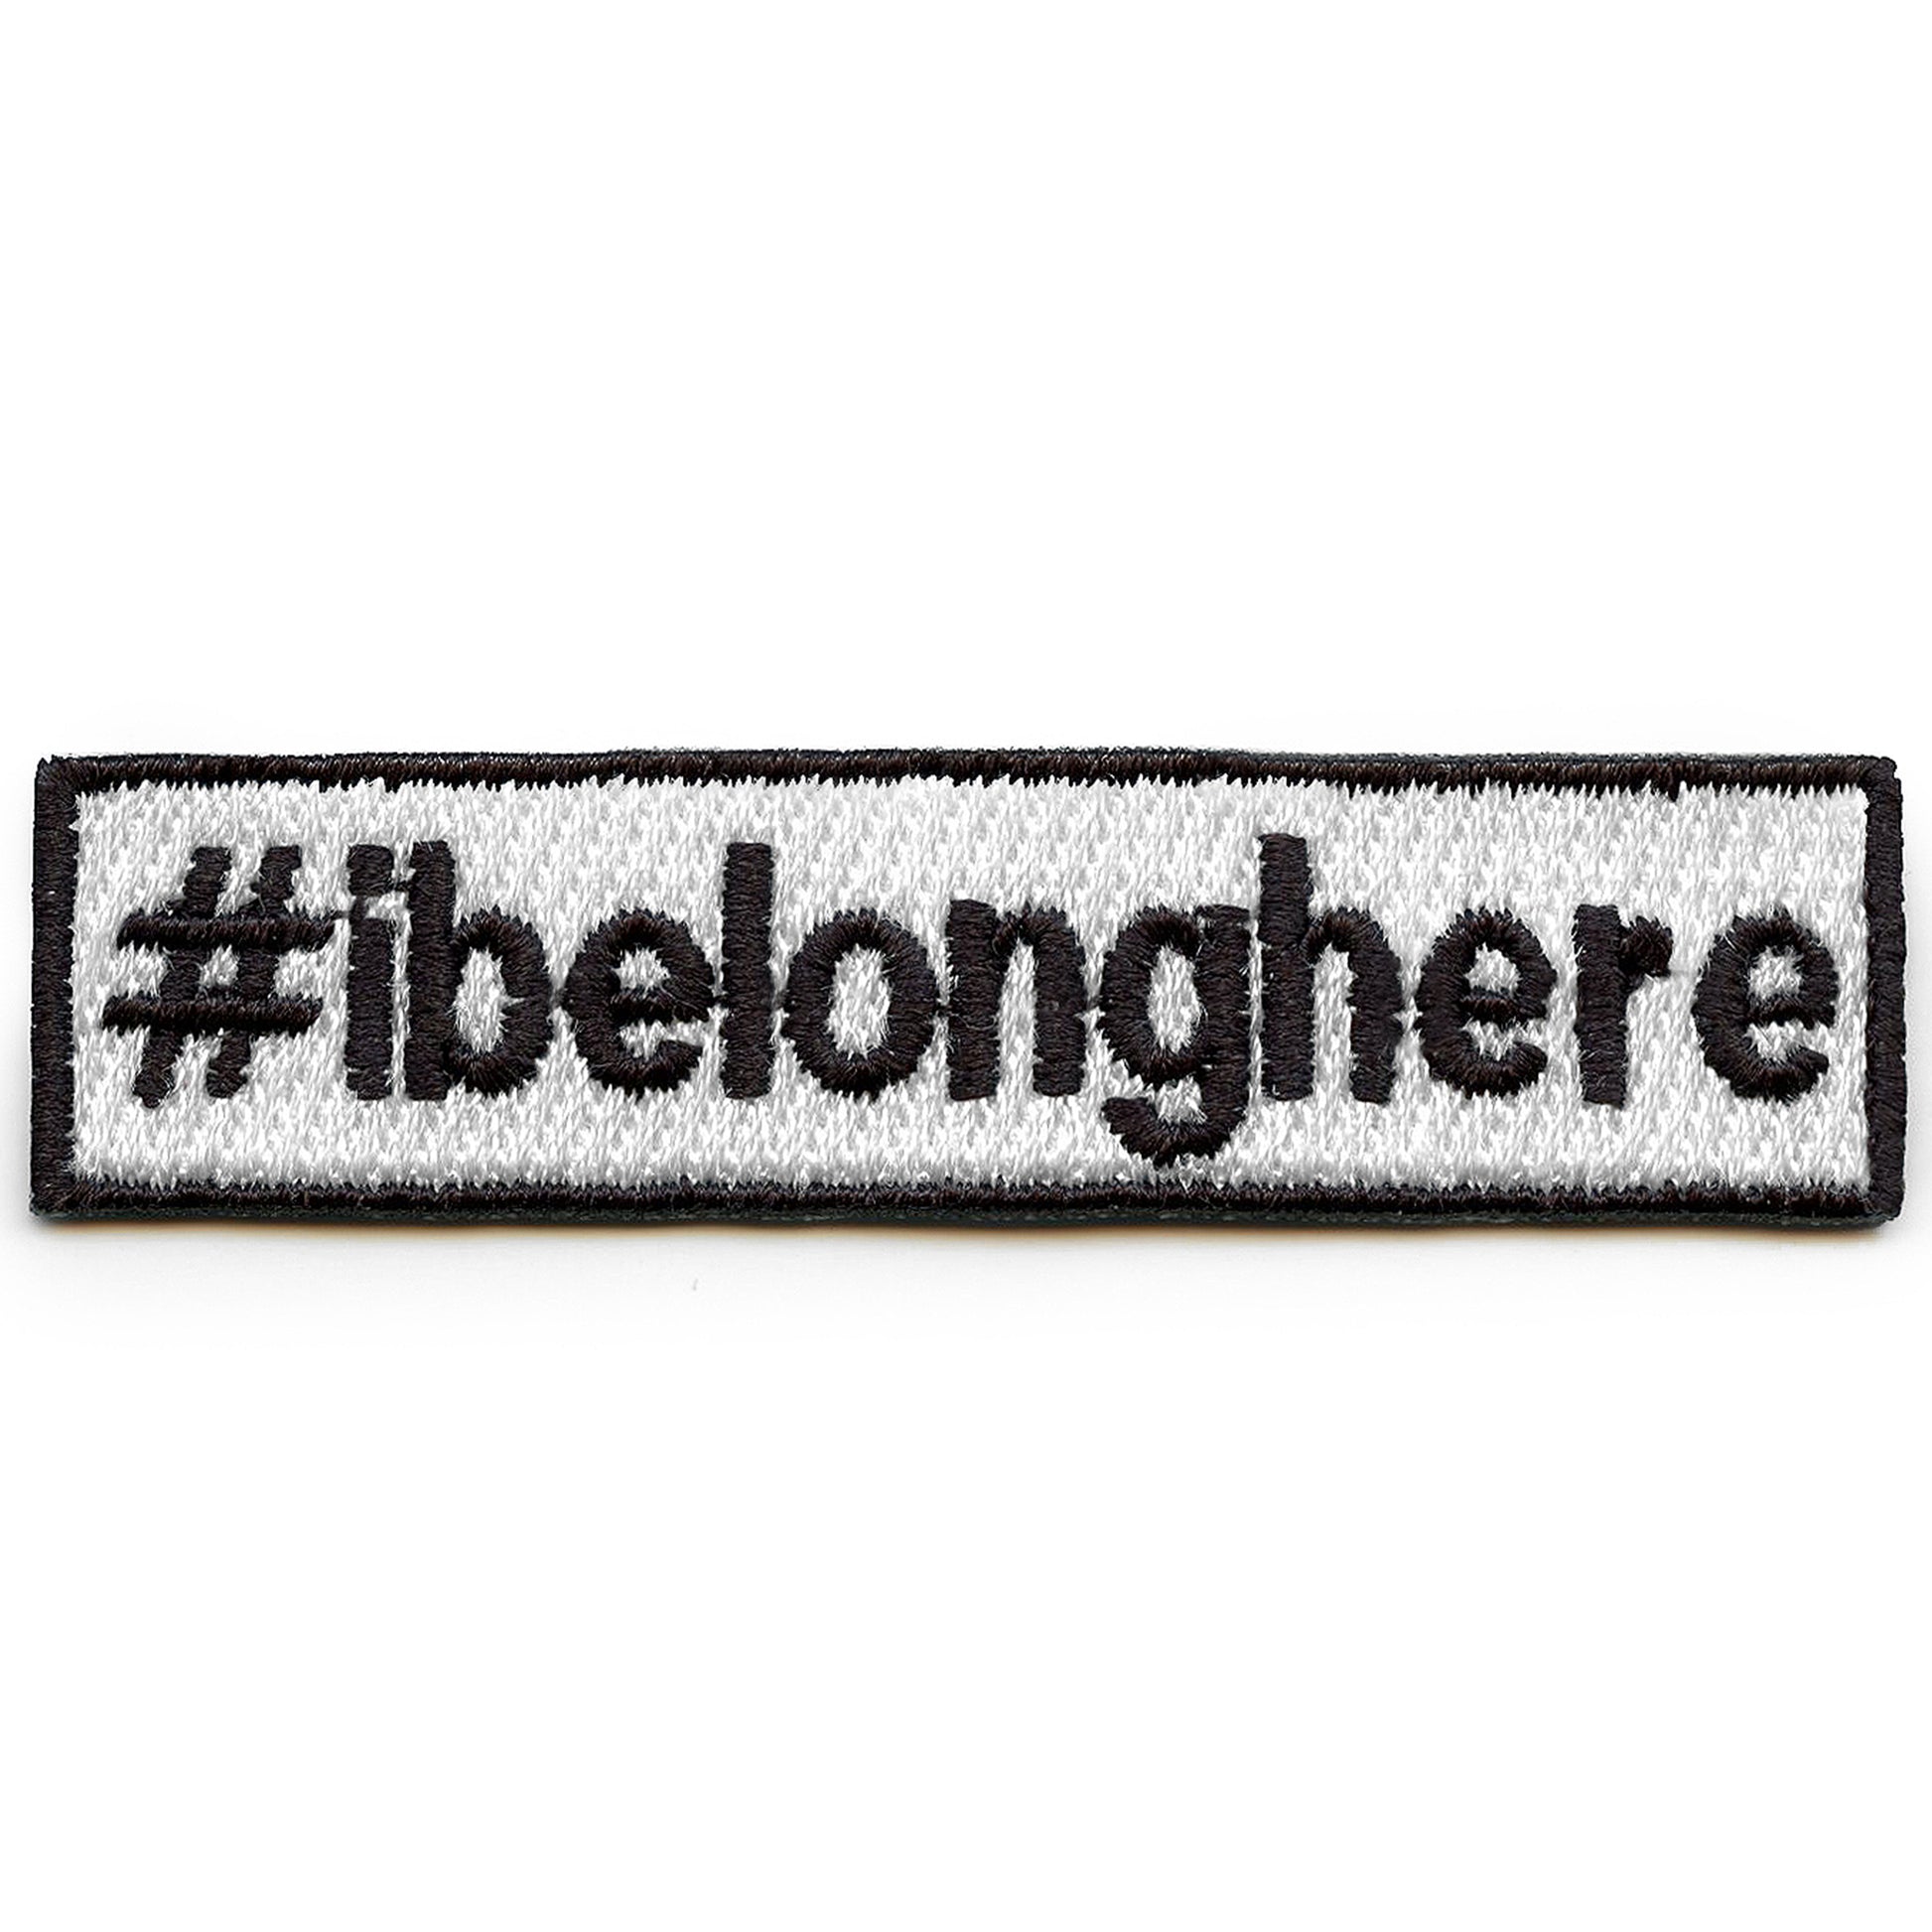 I Belong Here Hashtag Movement Box Logo Embroidered Iron On Patch 